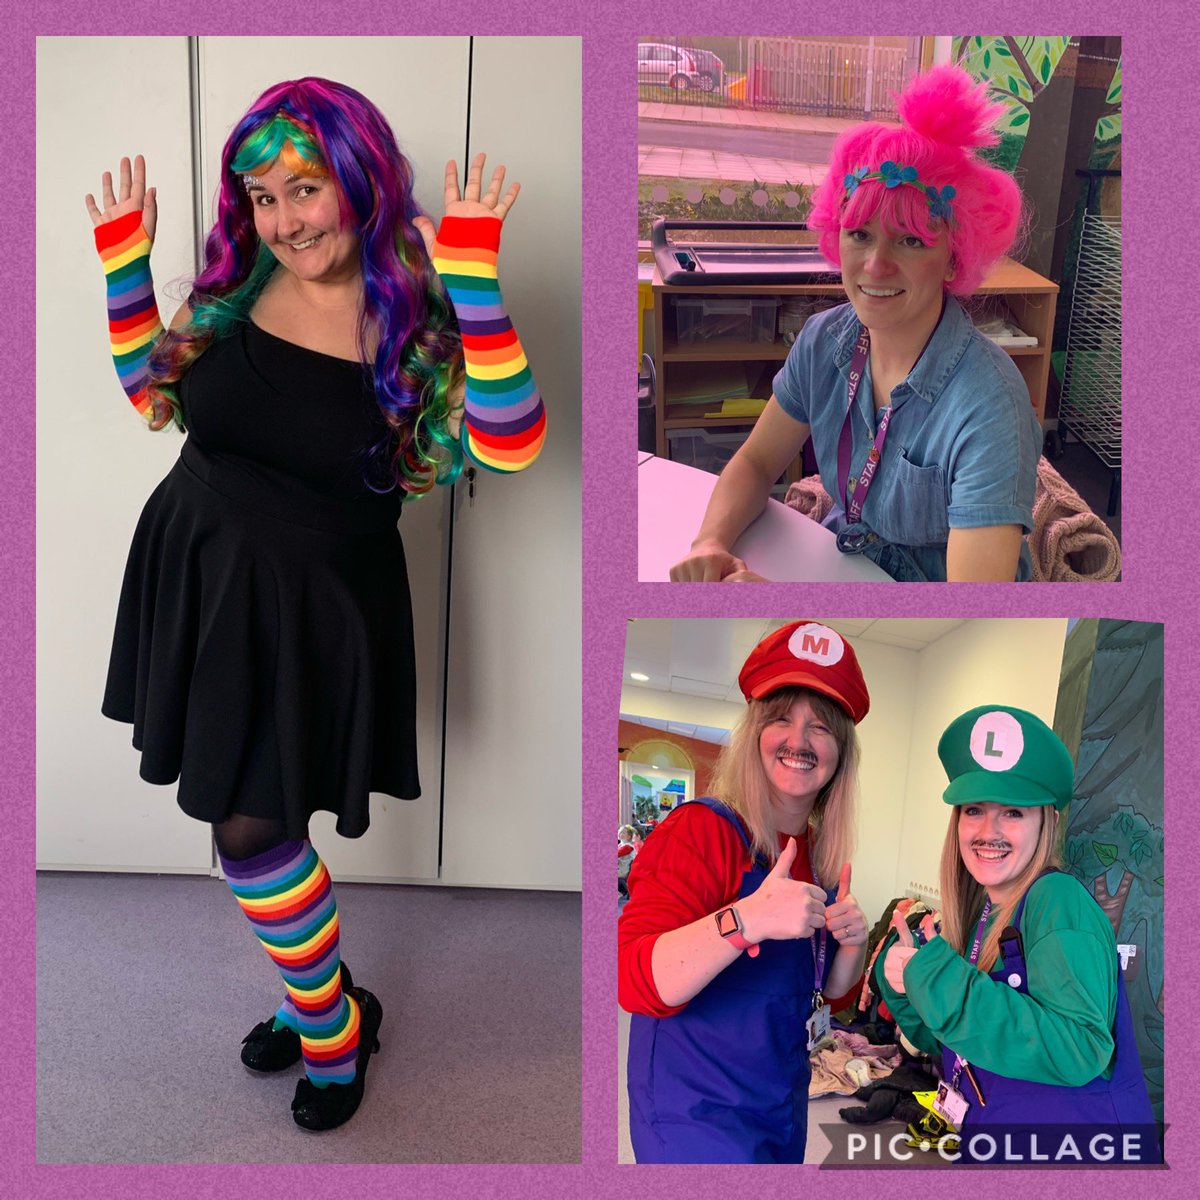 #ComicRelief #findyourfunny we’re all making eachother smile with silly outfits today... here is a selection! @reach2trust @cathiepaine @GeraldineCrofts